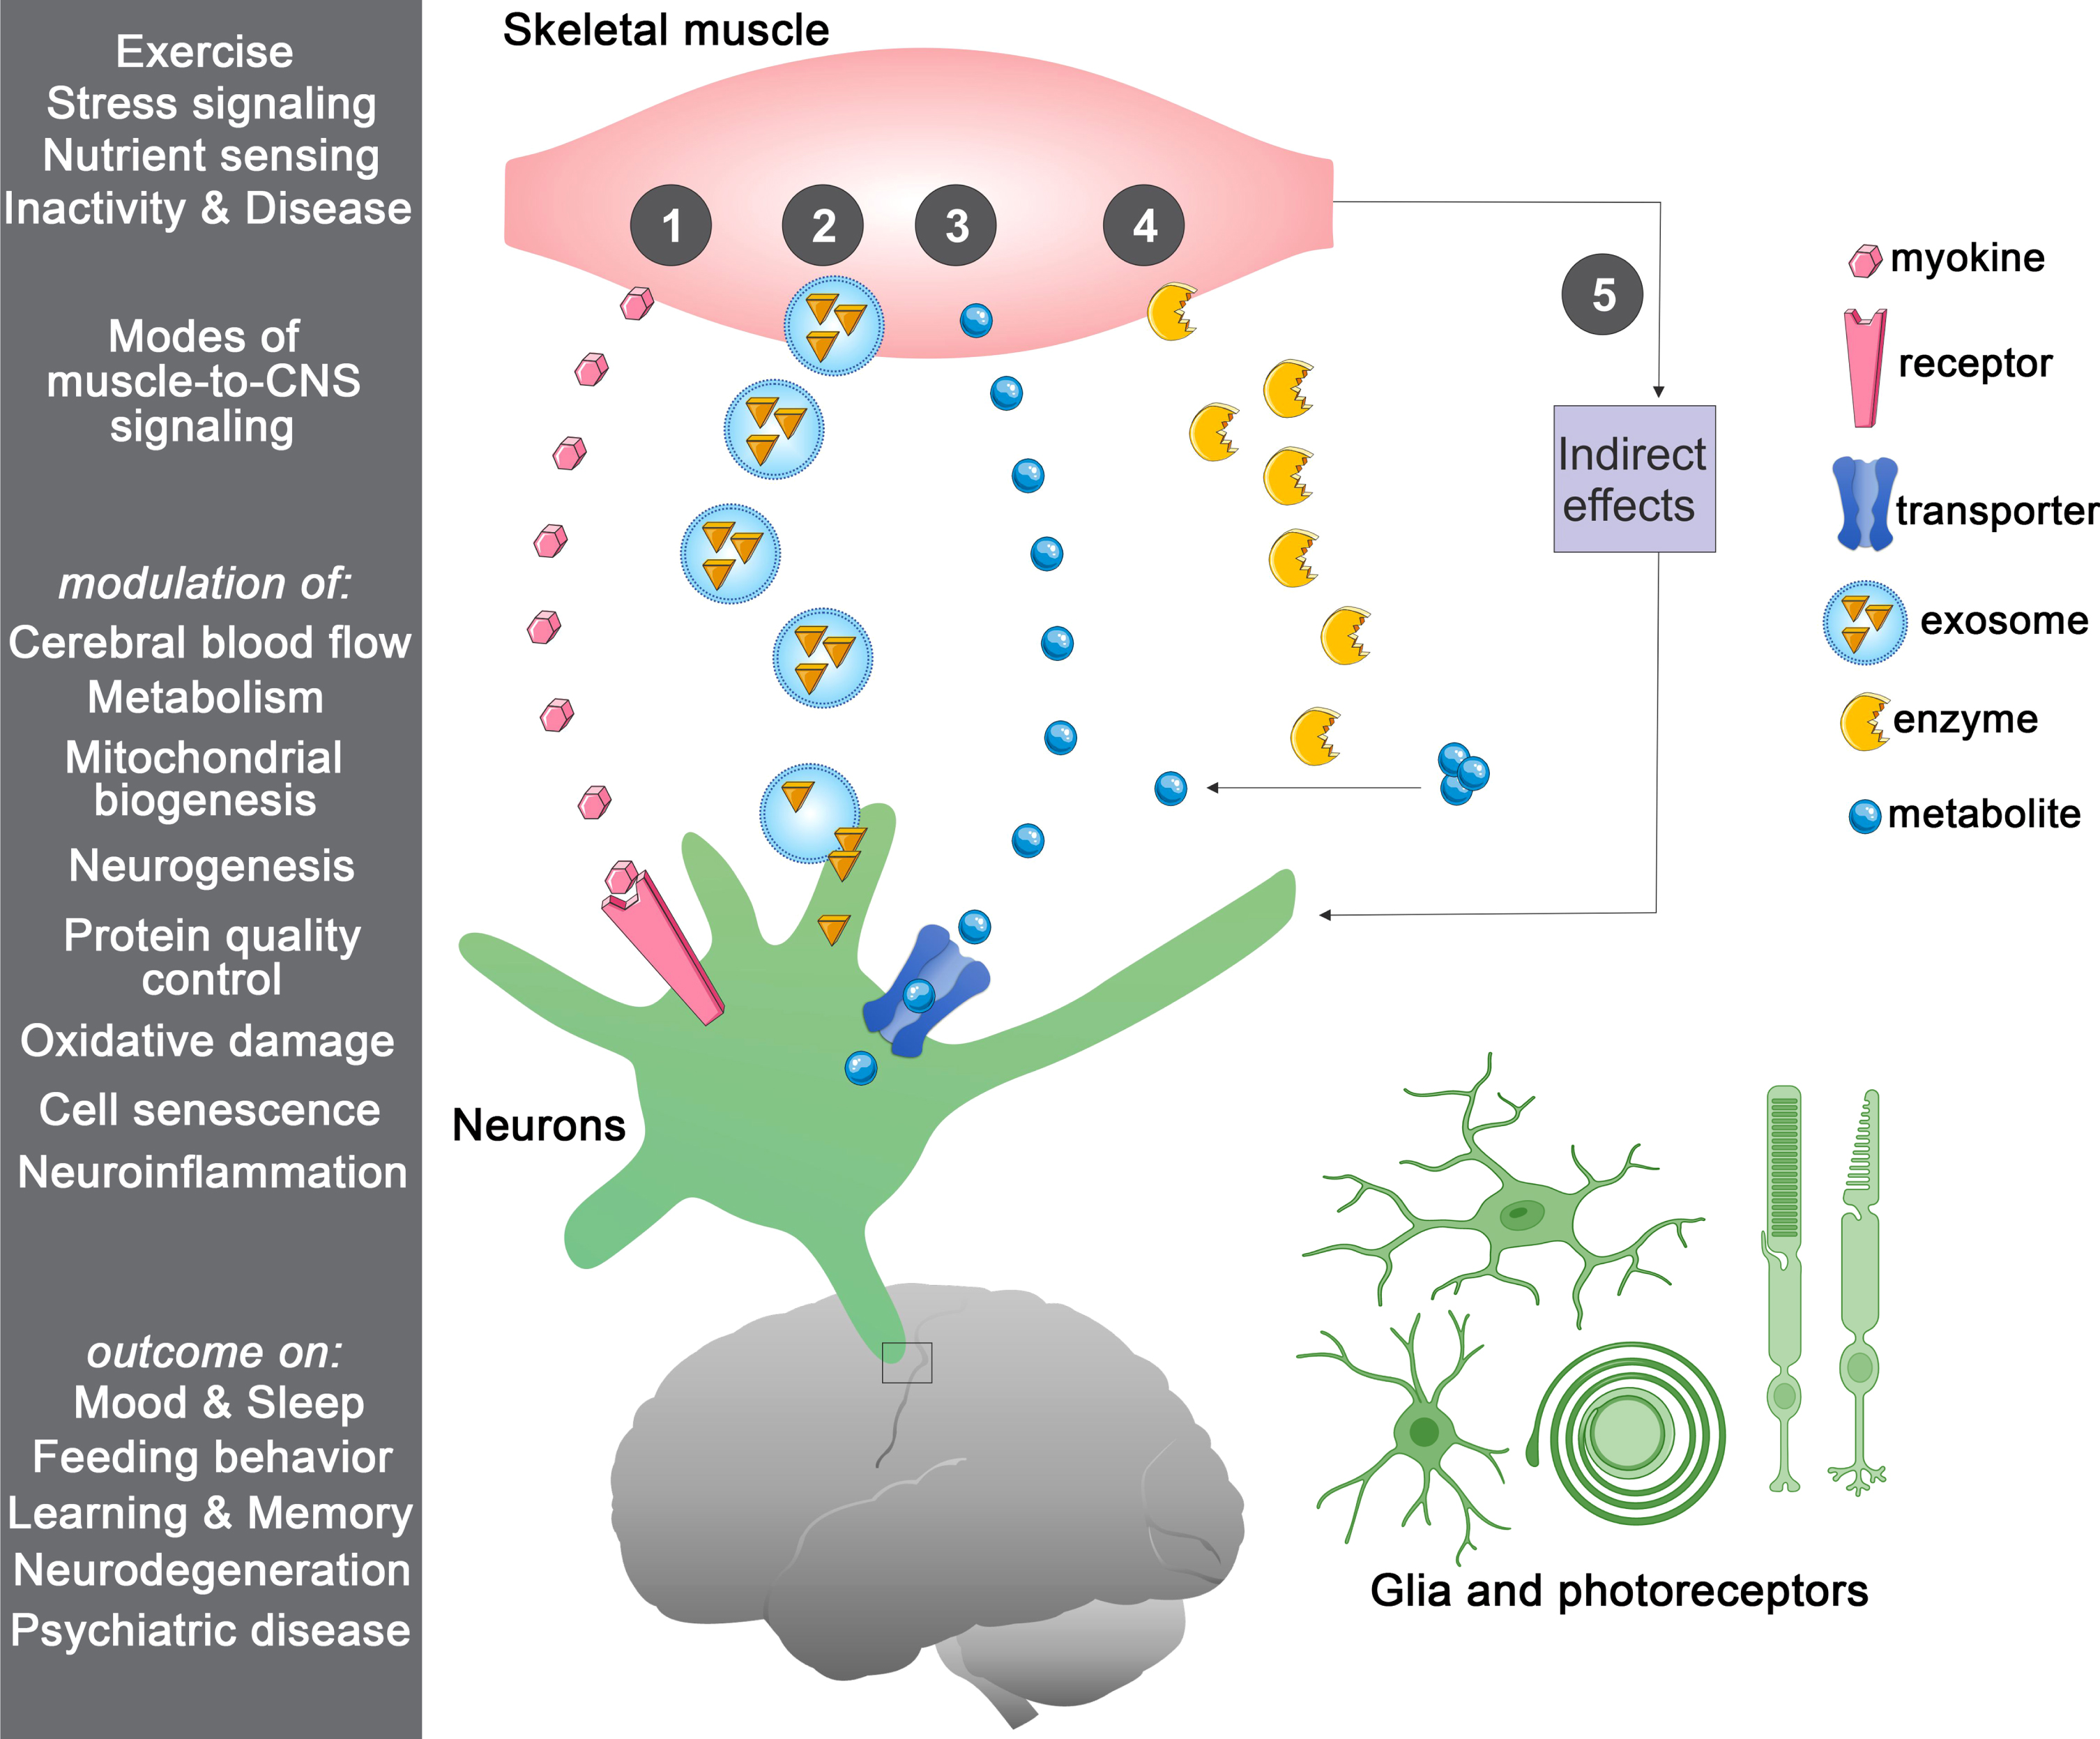 Multiple routes of muscle-to-CNS signaling. In response to a variety of stimuli, skeletal muscle can communicate in a number of ways with the central nervous system (CNS), including the following: (1) by secreting signaling proteins (myokines) that can bind to receptors in the blood-brain barrier (BBB) and brain cells (neurons and/or glia), with the consequent induction of downstream signaling; (2) by releasing extracellular vesicles such as exosomes that contain signaling factors; (3) by releasing metabolites (myometabolites) that enter the brain through solute transporters present on the BBB and brain cells; (4) by secreting enzymes that produce signaling factors in the muscle, in the circulation, and/or in the brain; and (5) via indirect effects stemming from modulation of muscle metabolism and/or myokine signaling to other tissues distinct from the brain. Regulated processes include improvement in cerebral blood flow, brain metabolic functions, mitochondrial biogenesis, and neurogenesis whereas protective signaling reduces oxidative stress, cell senescence, and neuroinflammation. Altogether, the action of muscle-brain signaling on these cellular processes improves cognitive functions.